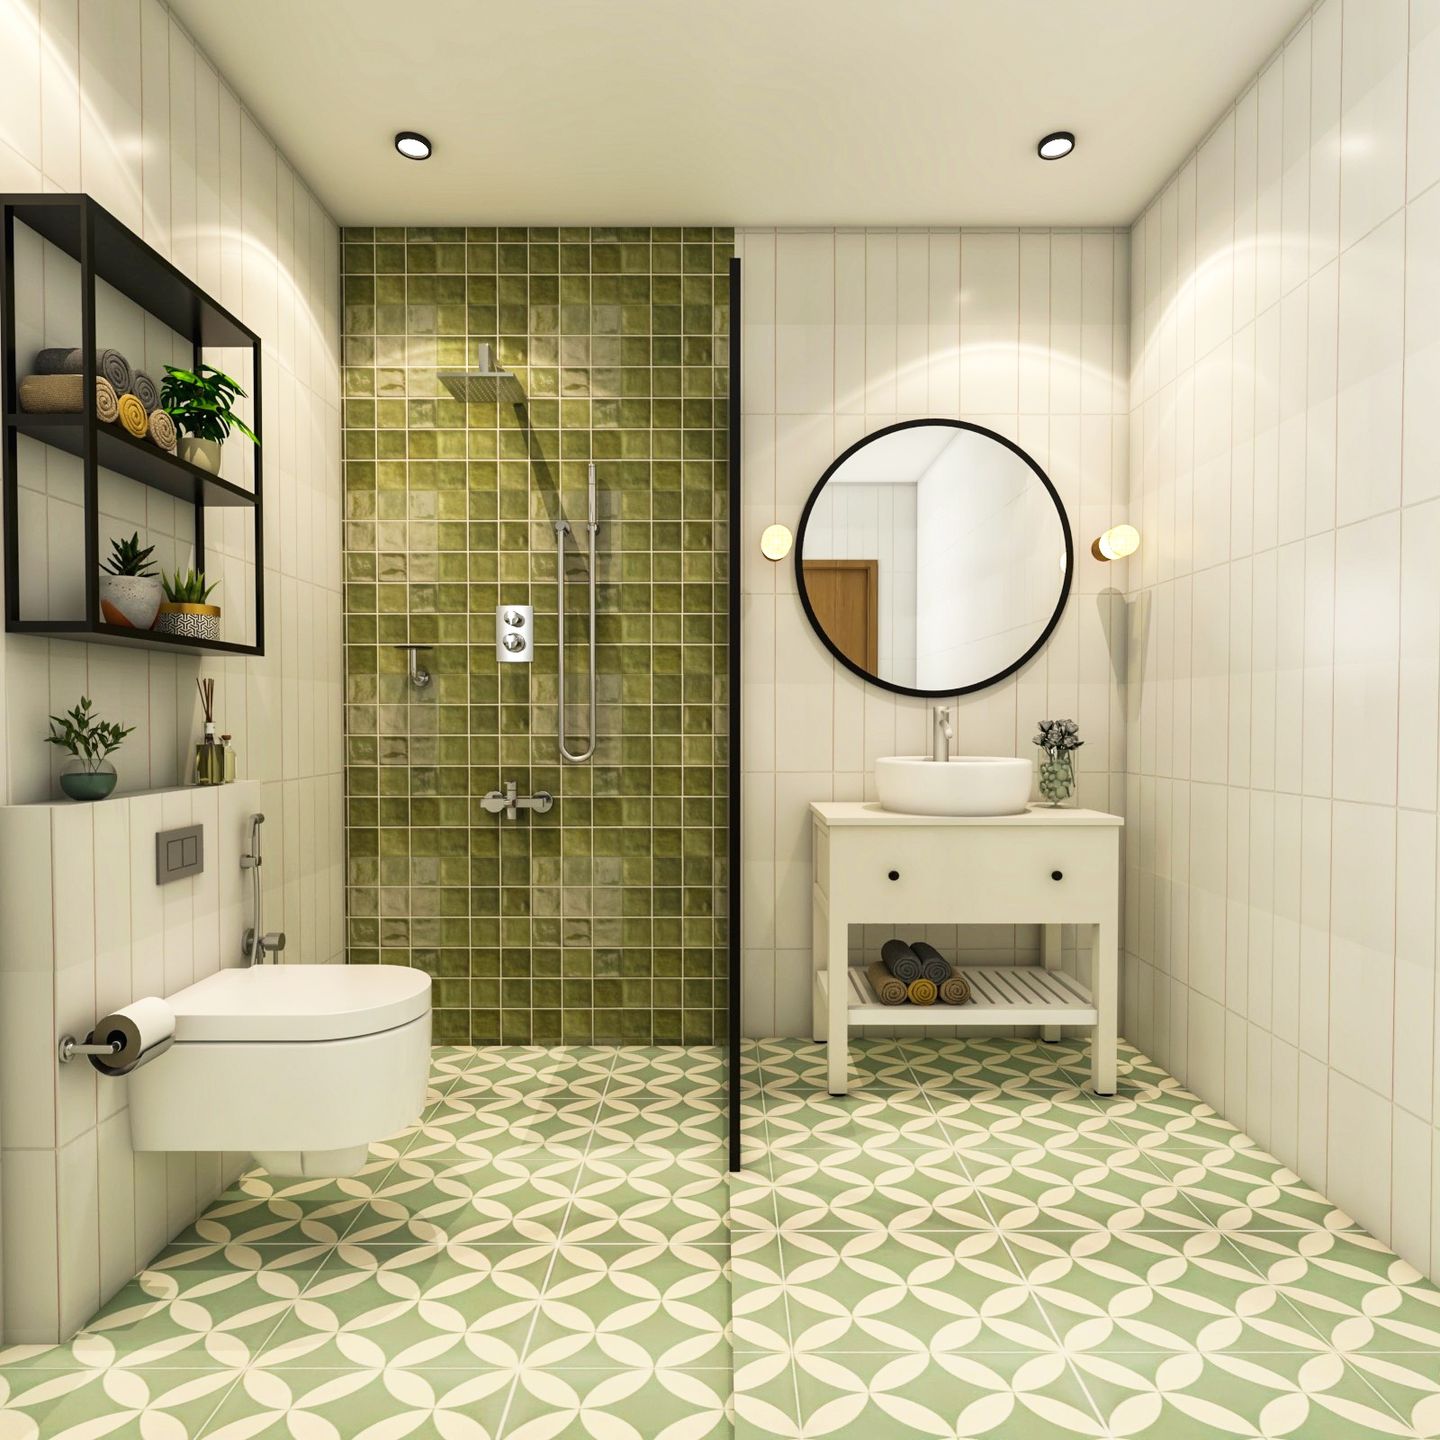 Green And White Bathroom Design With White Bathroom Cabinet And Black-Framed Wall-Mounted Open Storage - Livspace